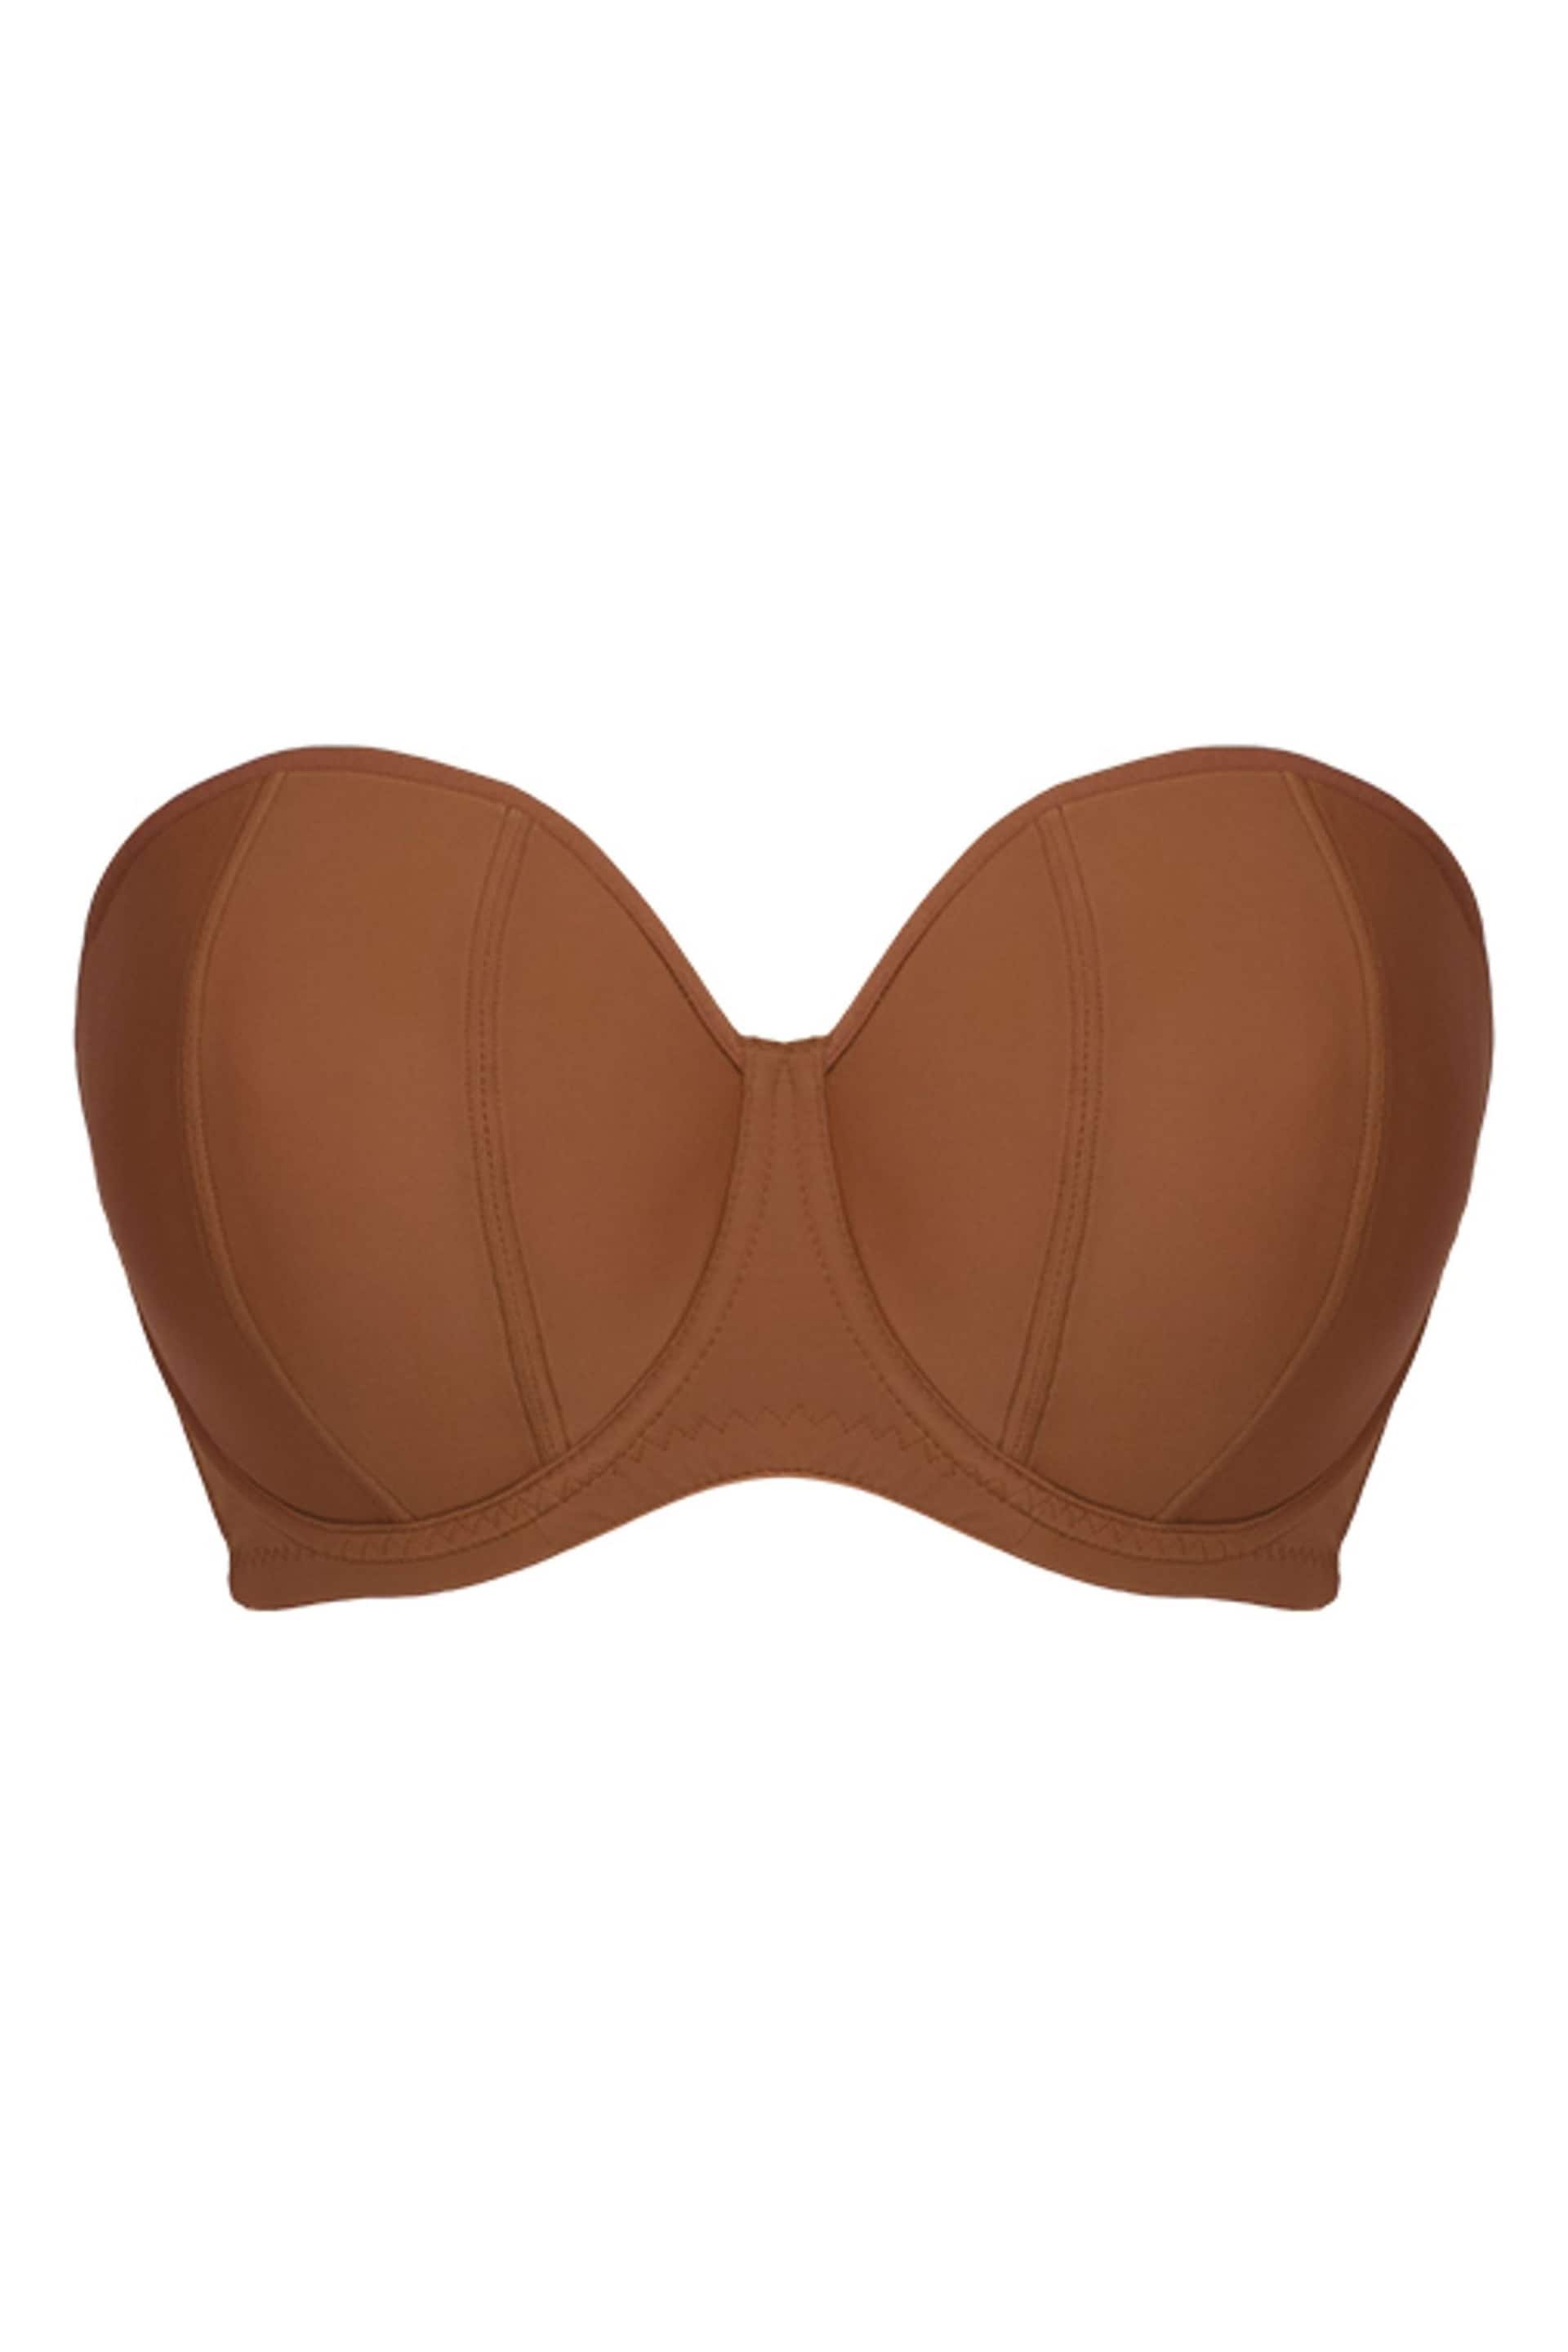 Curvy Kate Luxe Strapless Bra - Image 5 of 7